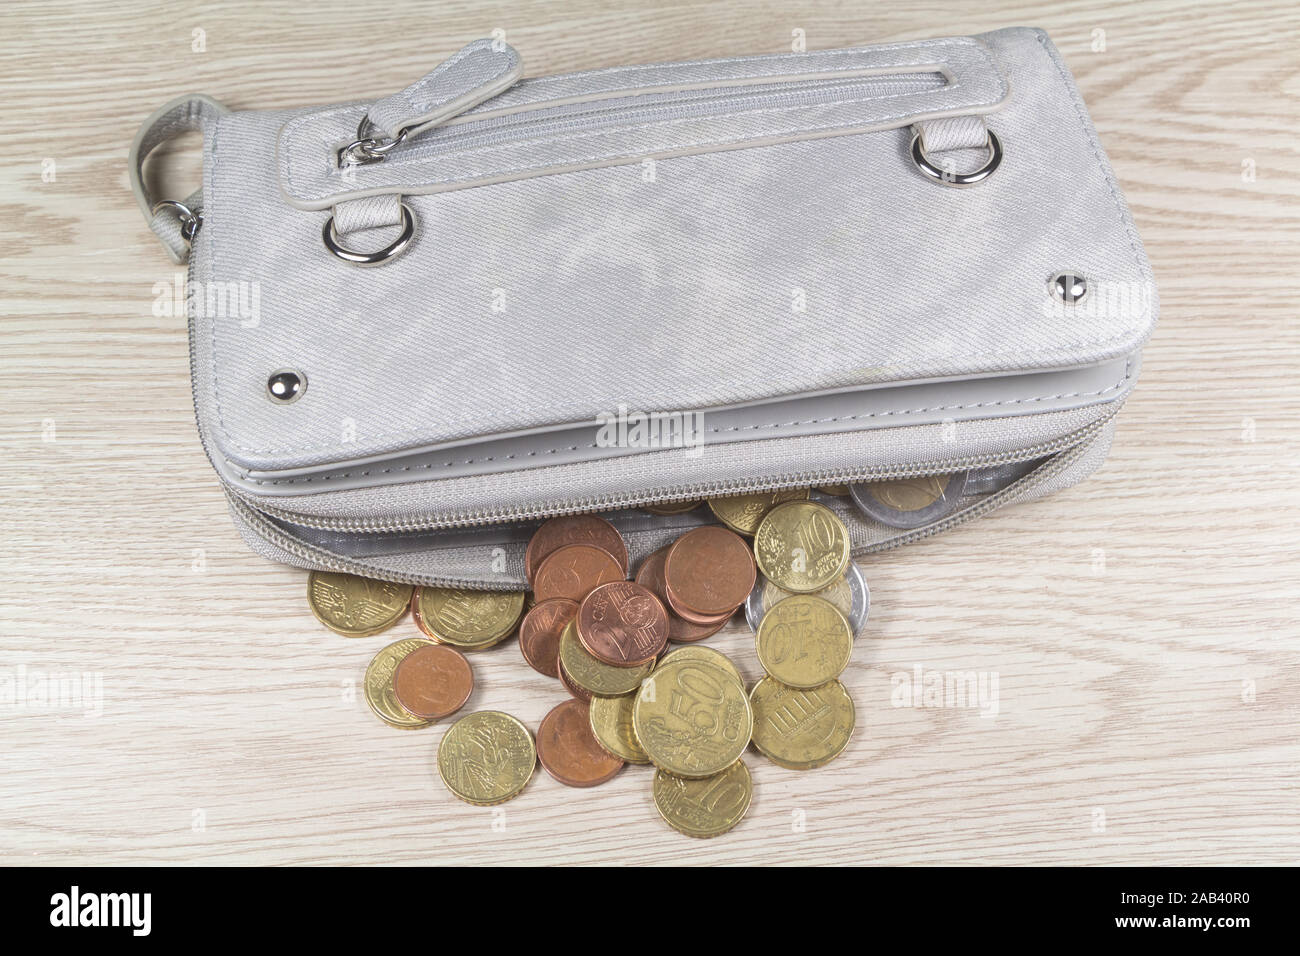 Euros coins take out of a purse on wooden background Stock Photo